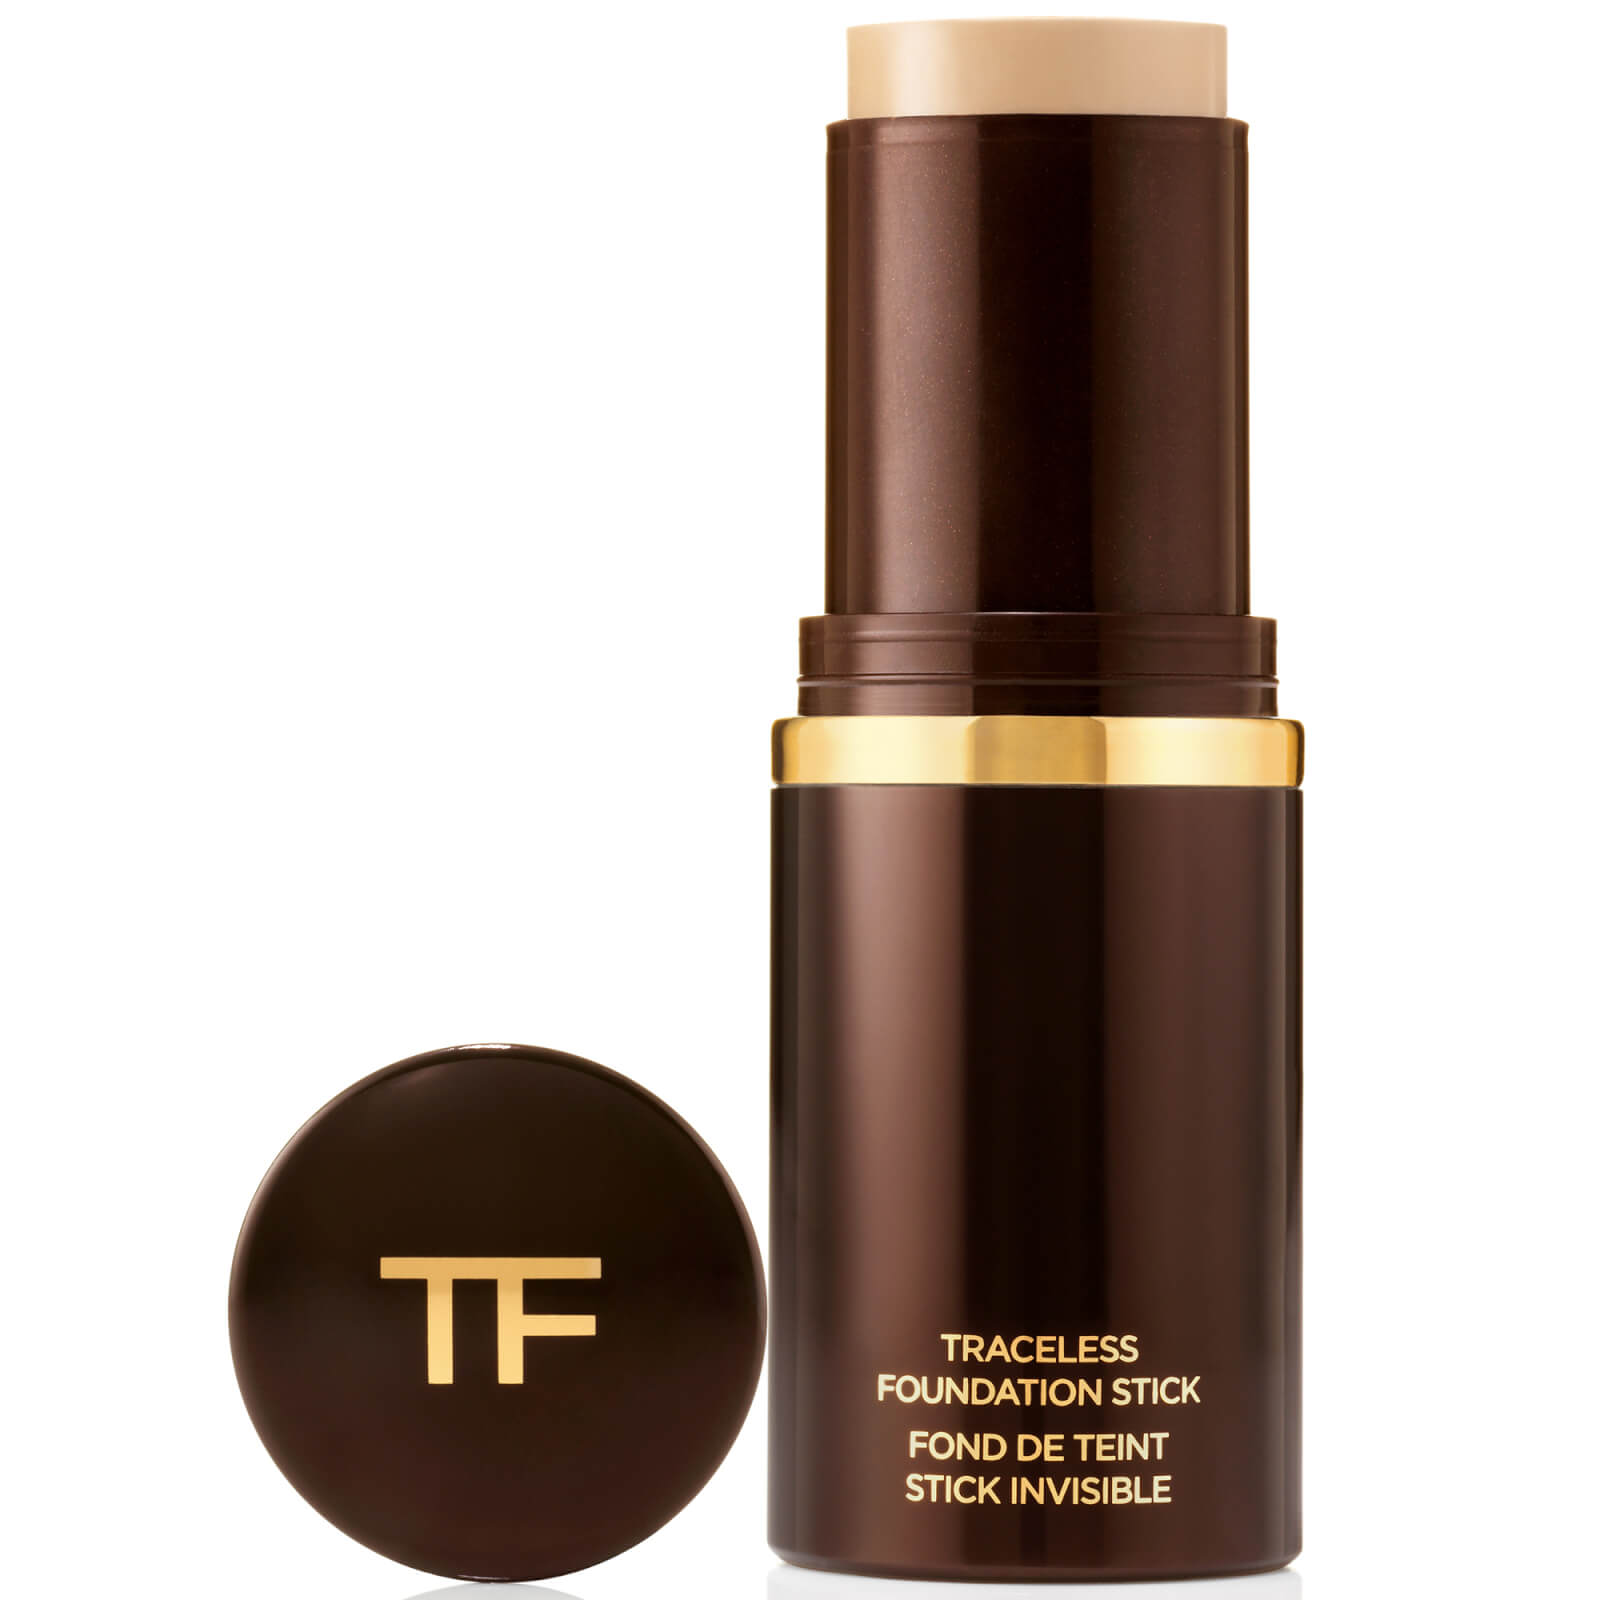 Tom Ford Traceless Foundation Stick 15g (Various Shades) - 2.5 Linen